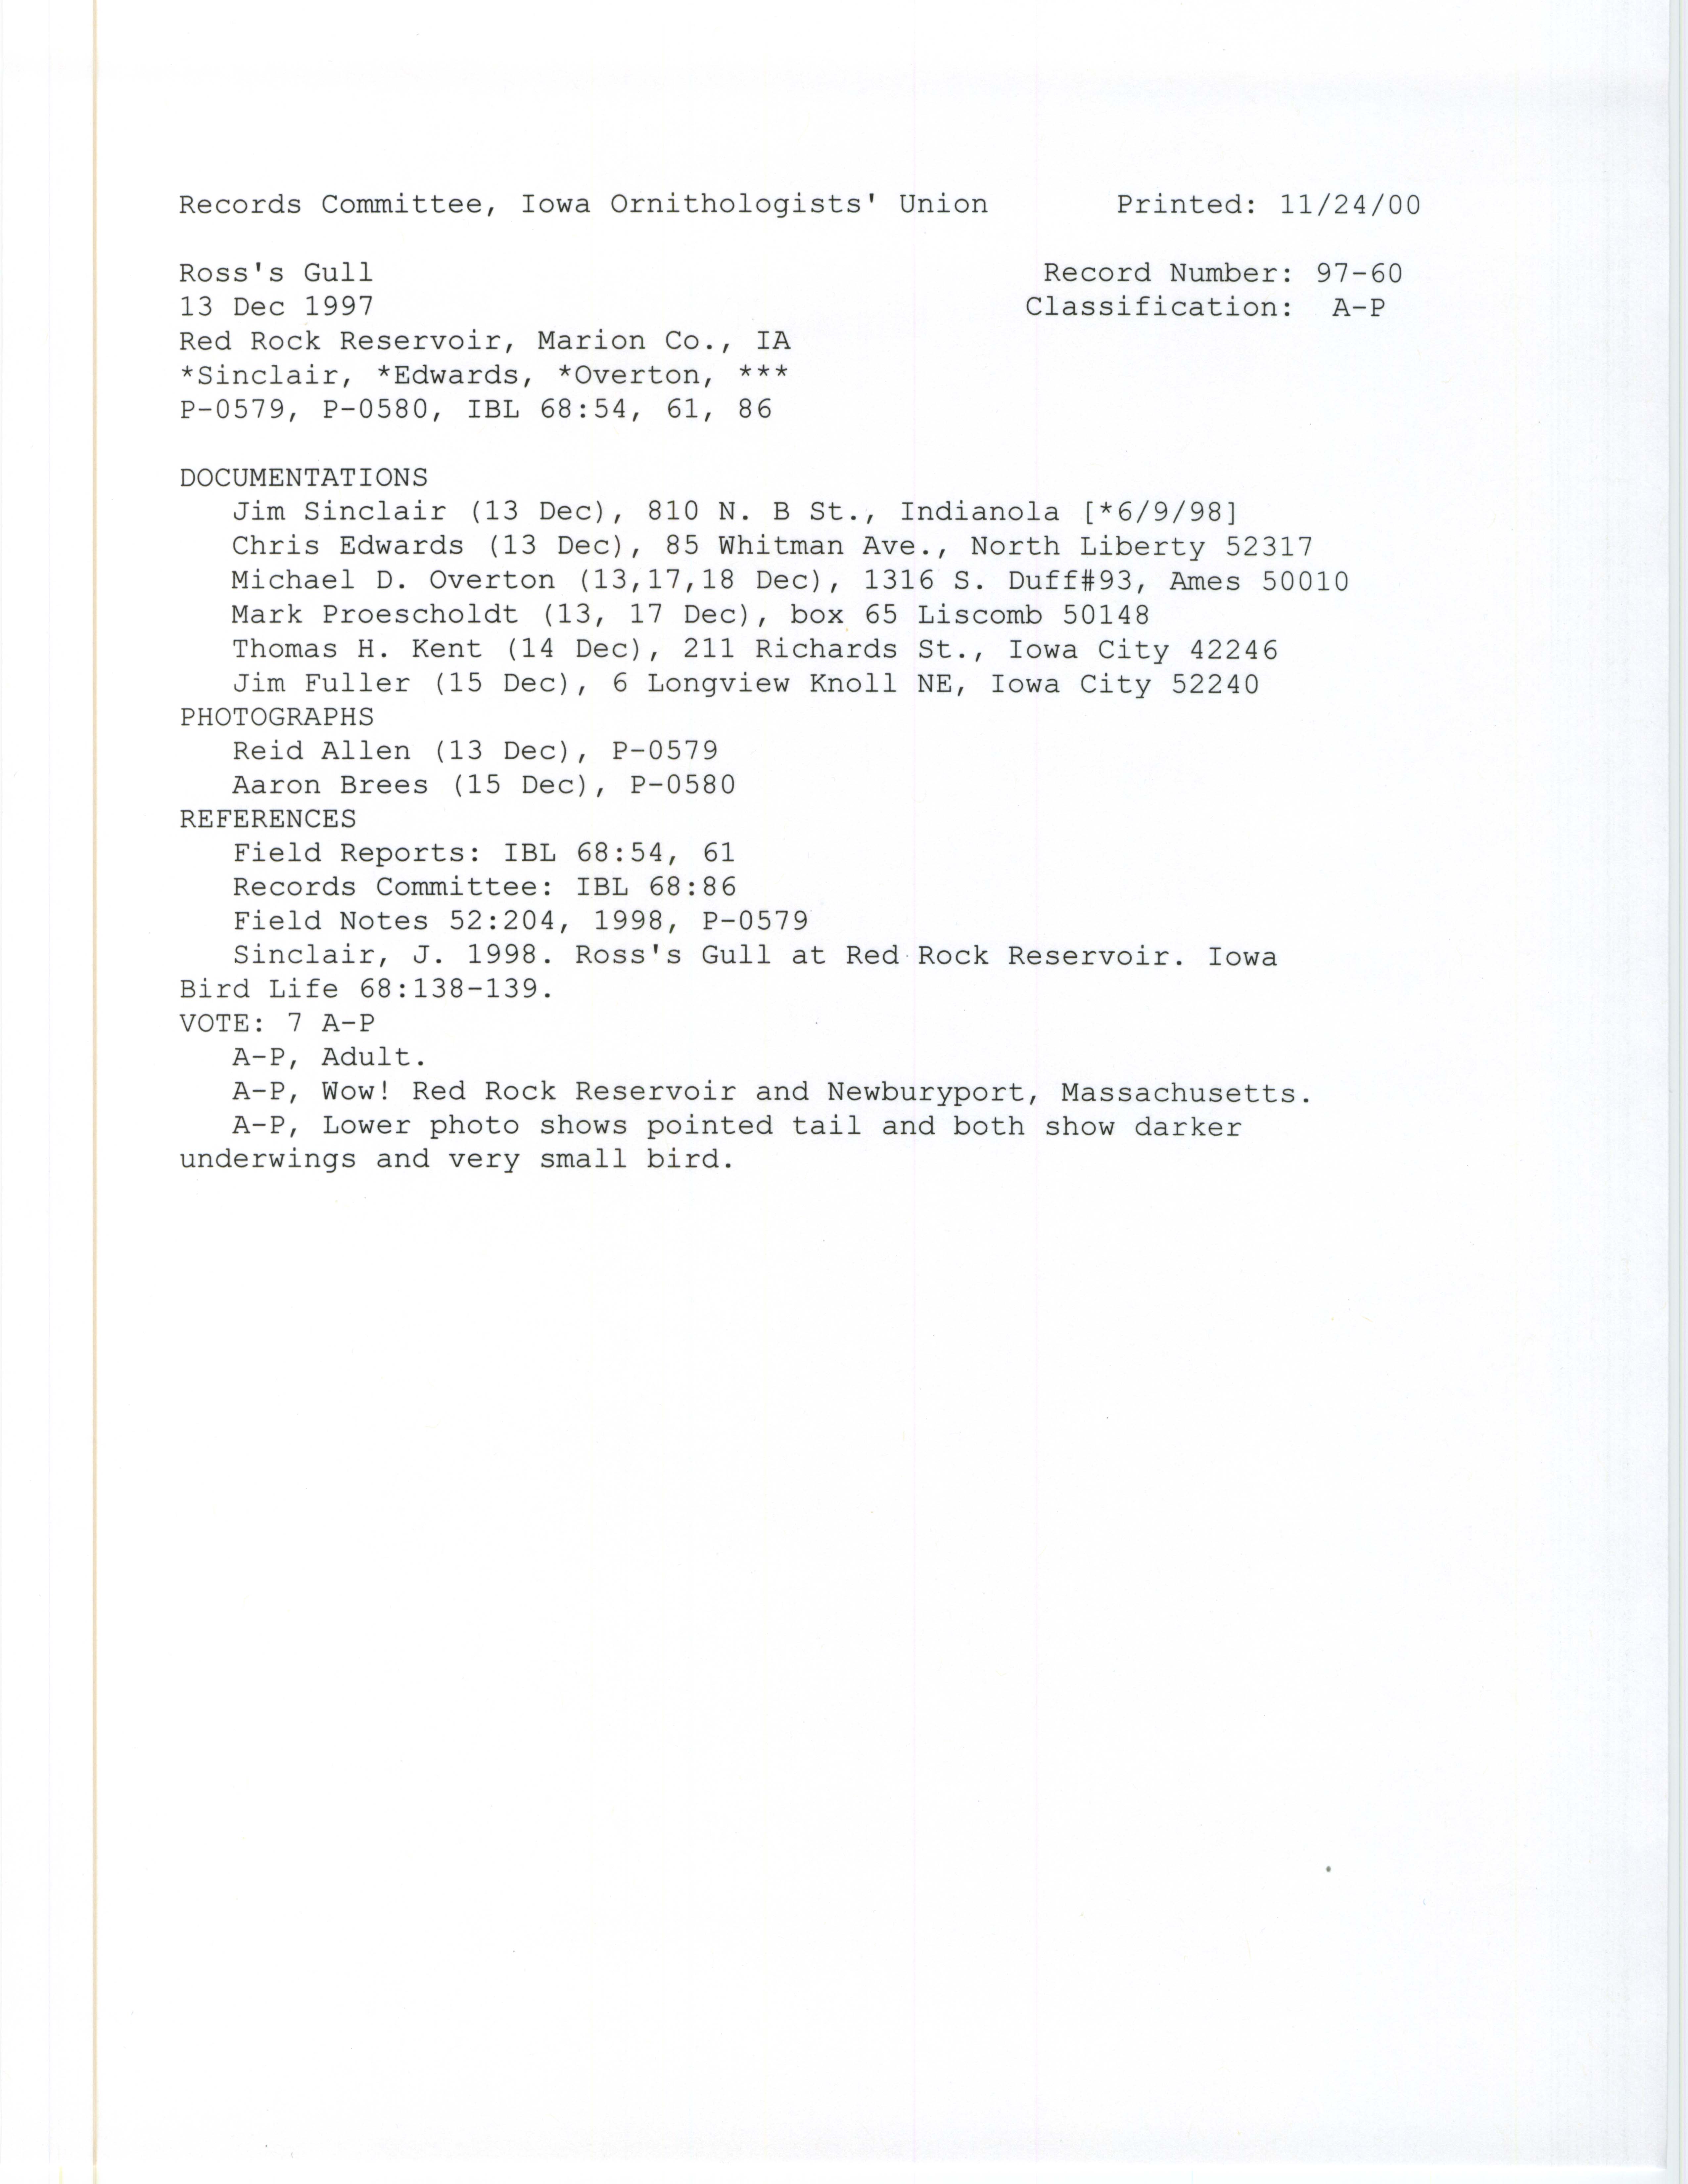 Records Committee review for rare bird sighting for Ross's Gull at Red Rock Dam, 1997